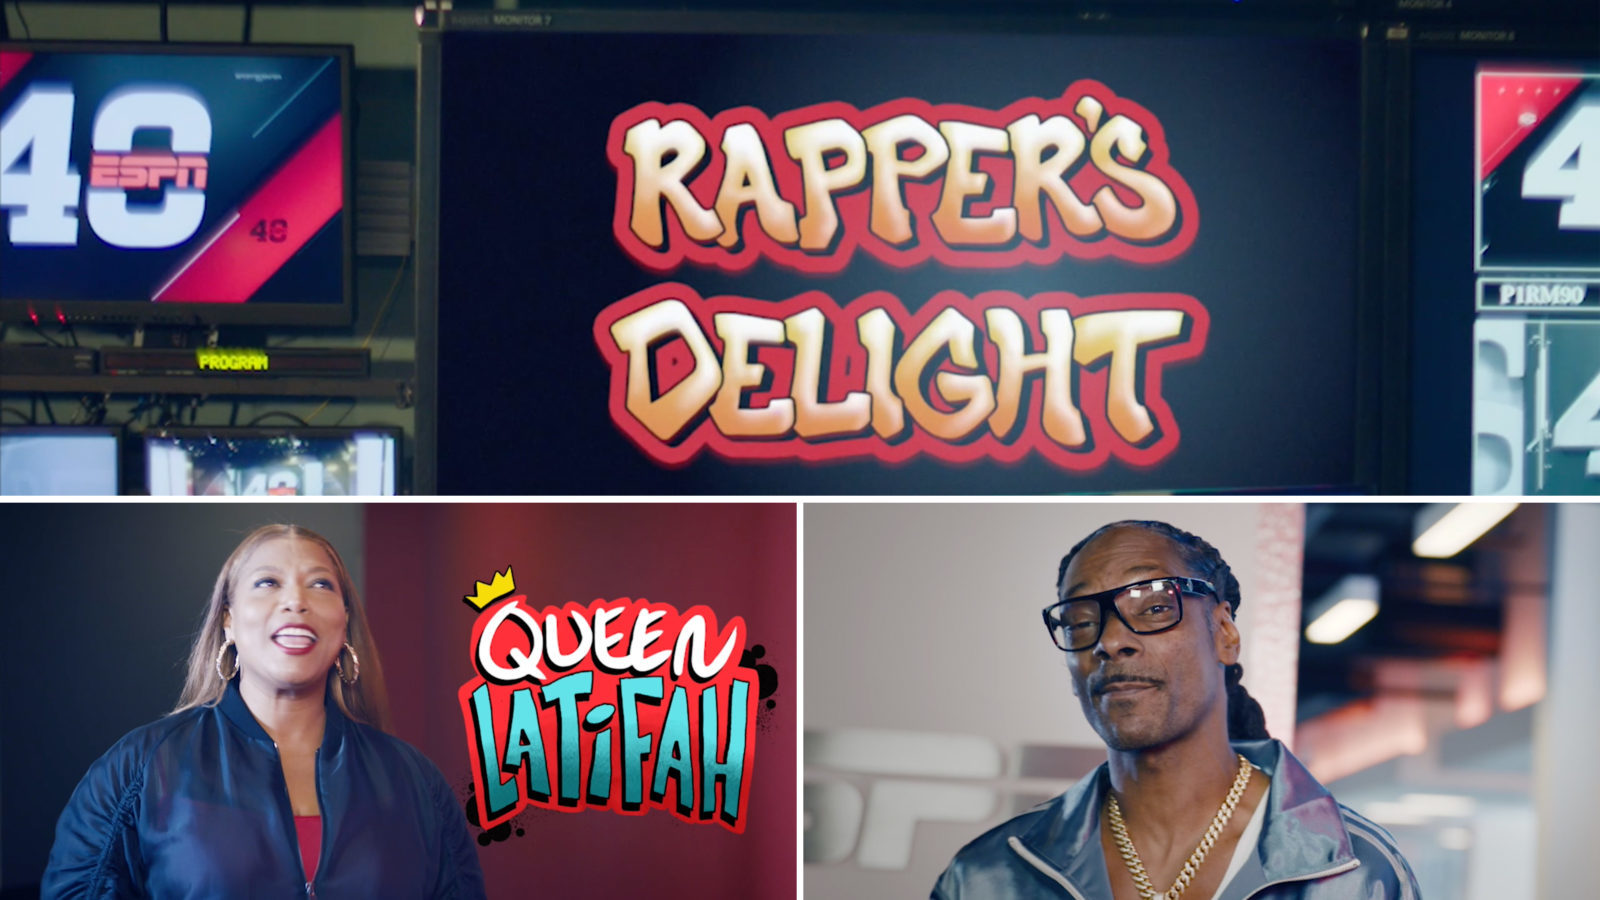 How Did Snoop Dogg And Queen Latifah Come To Rework Rapper S